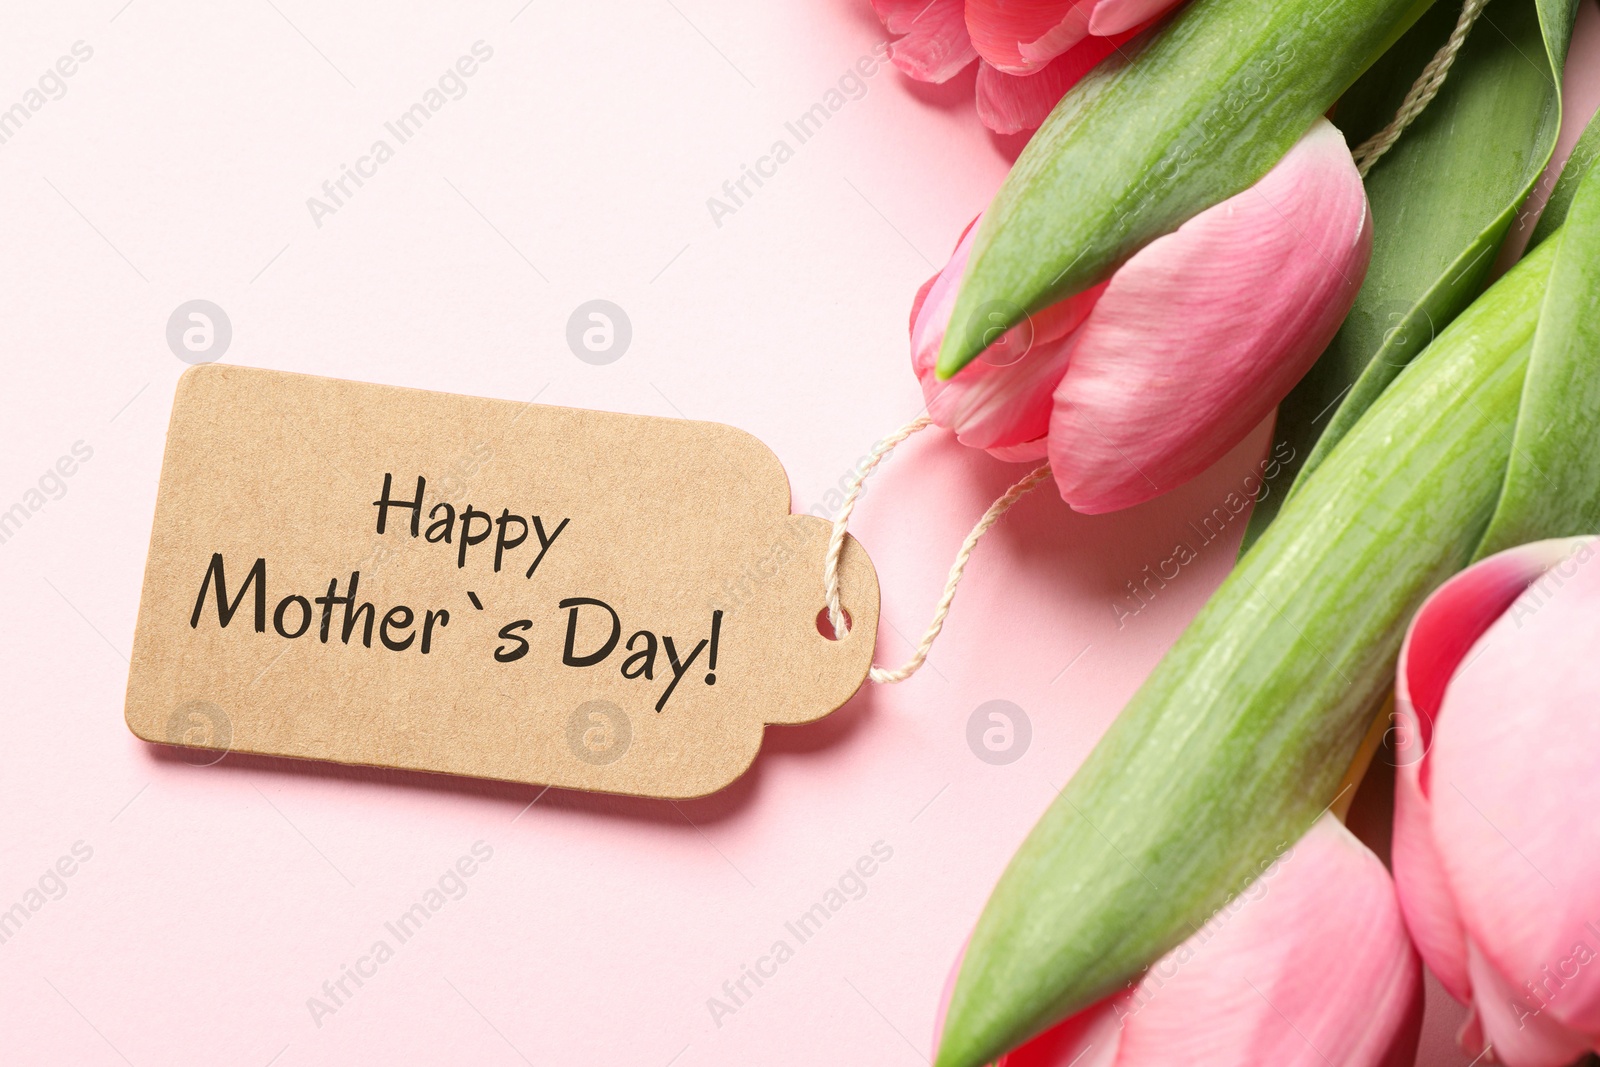 Image of Happy Mother's Day greeting label and beautiful tulip flowers on pink background